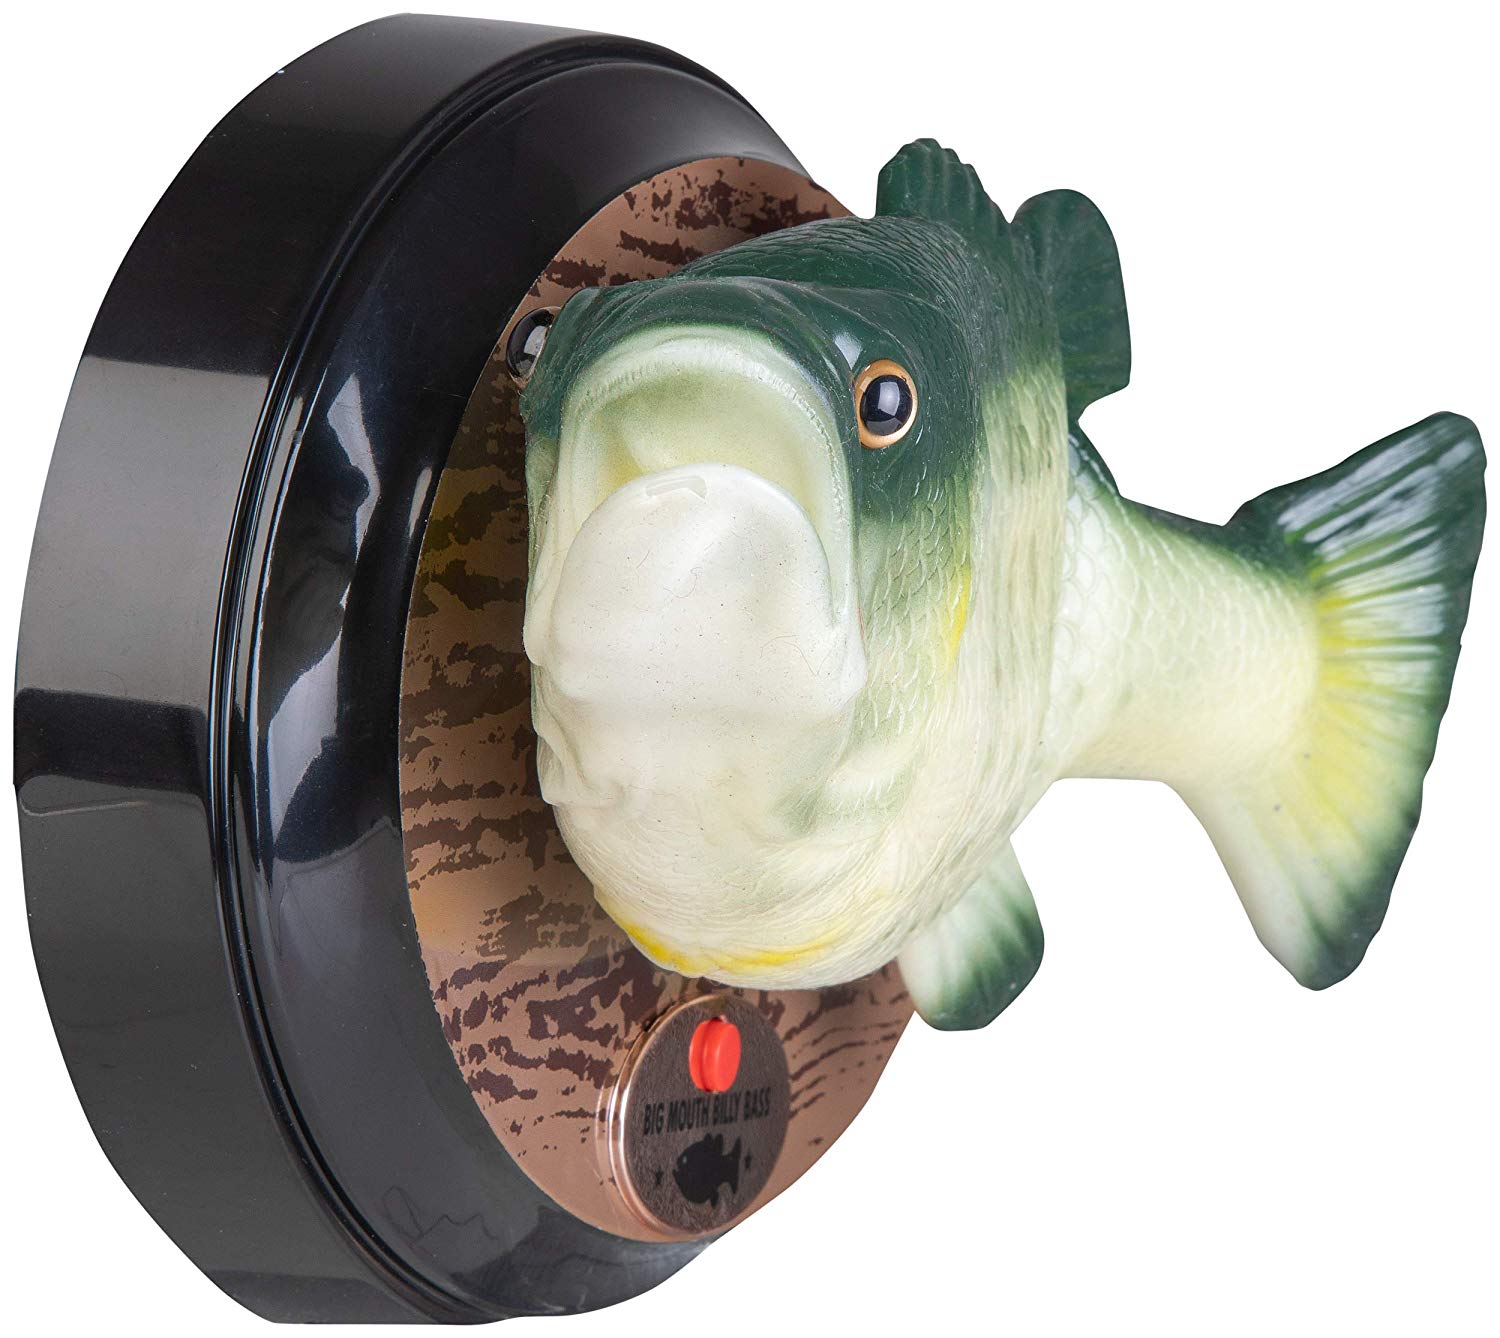 Big Mouth Billy Bass Compatible with Alexa